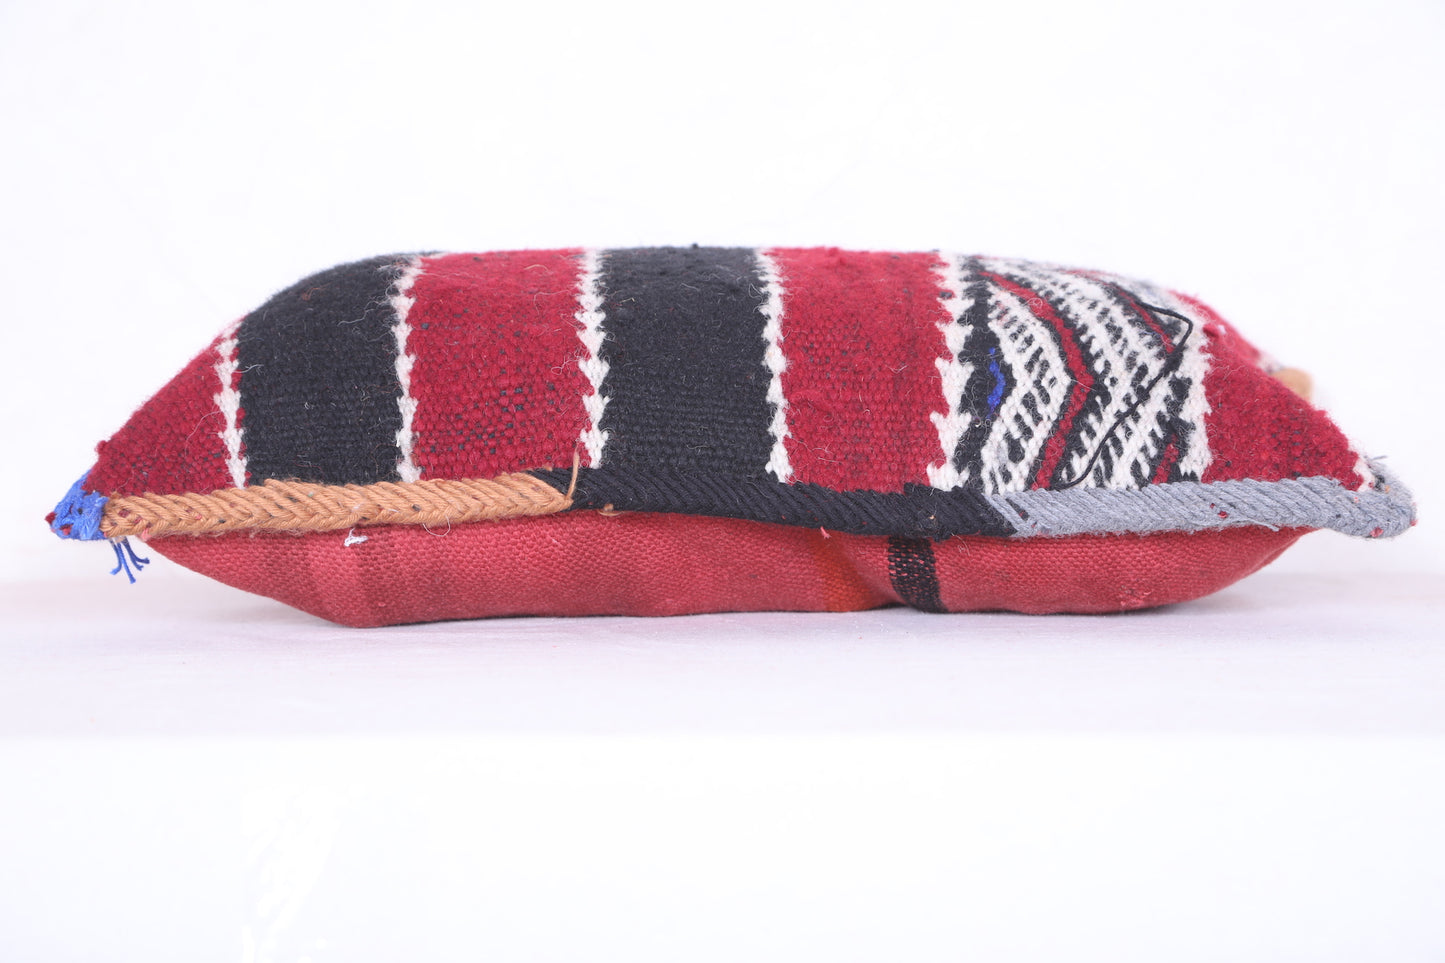 Moroccan handmade kilim pillow 14.9 INCHES X 19.6 INCHES